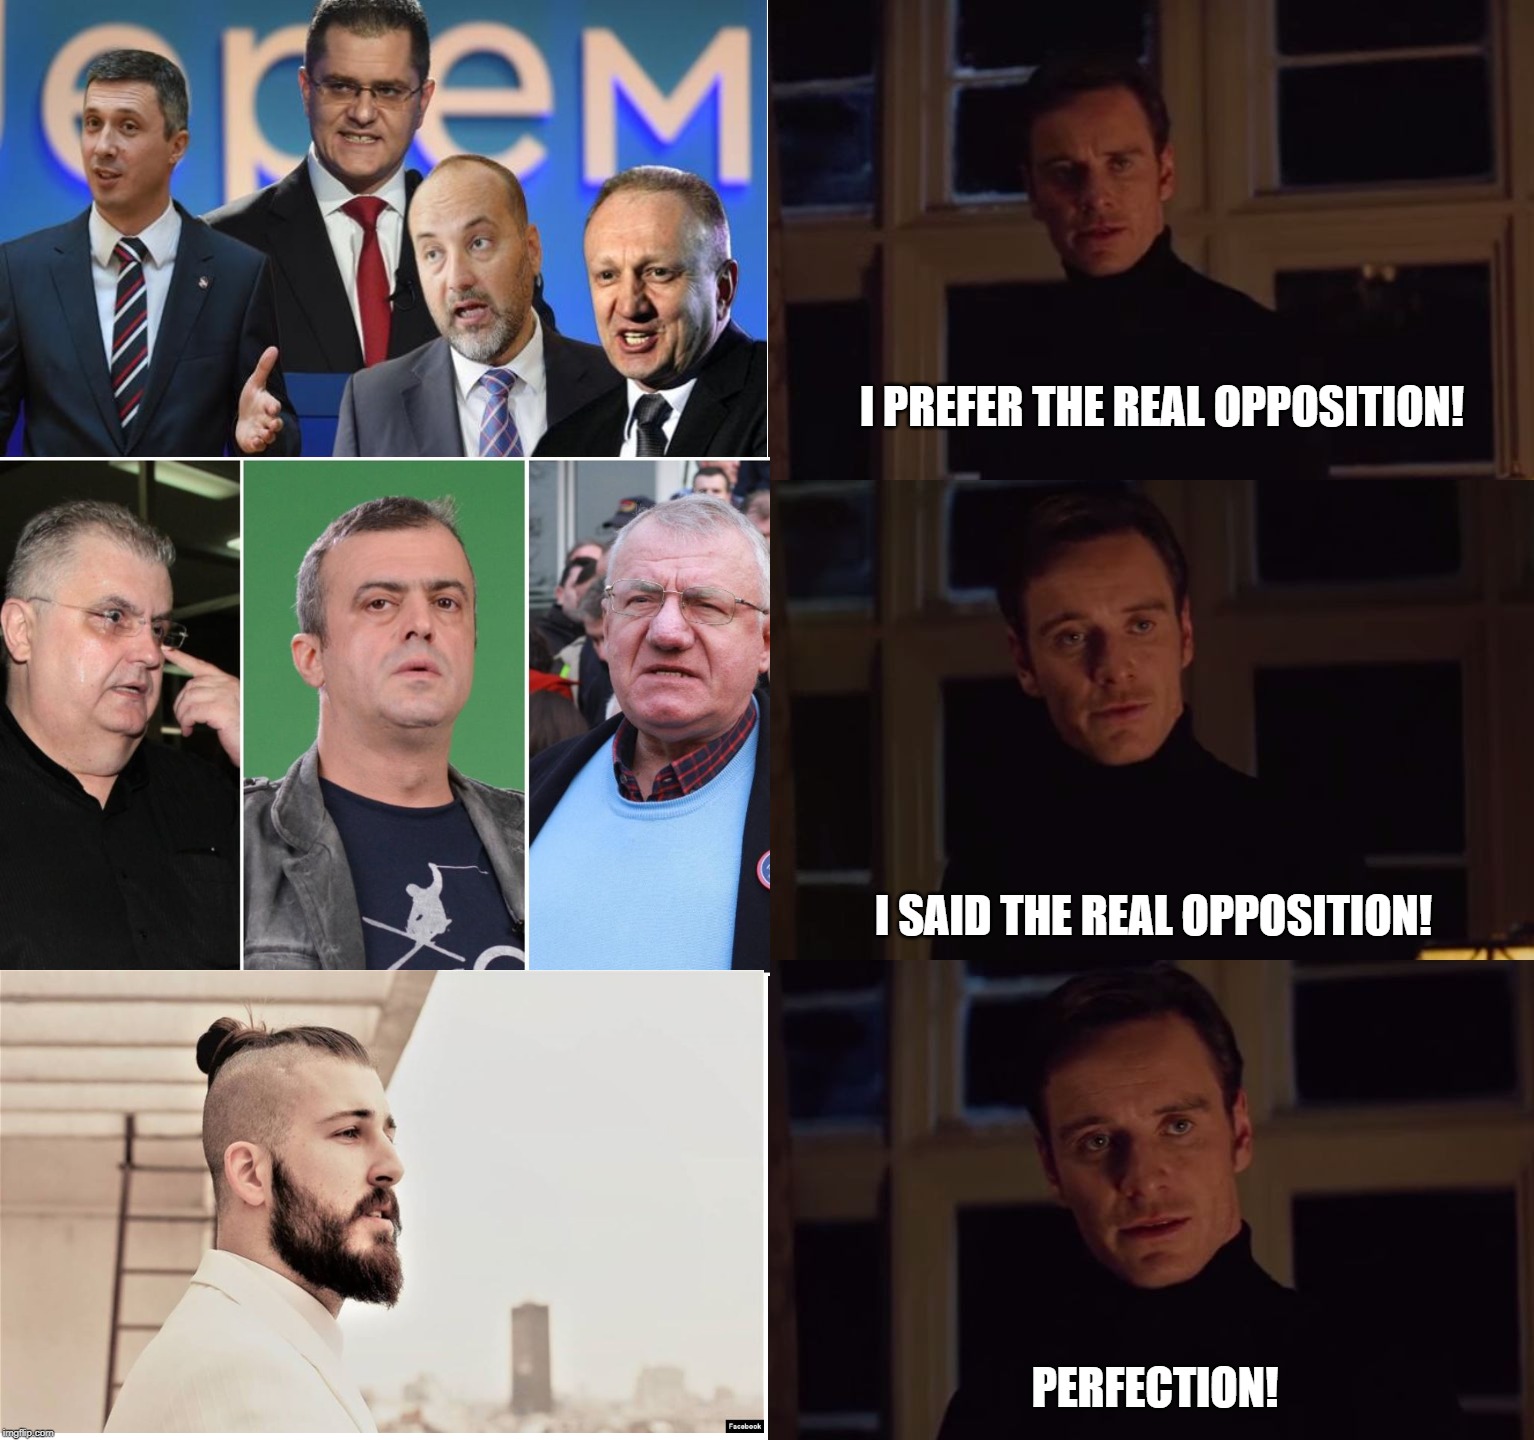 perfection | I PREFER THE REAL OPPOSITION! I SAID THE REAL OPPOSITION! PERFECTION! | image tagged in perfection | made w/ Imgflip meme maker